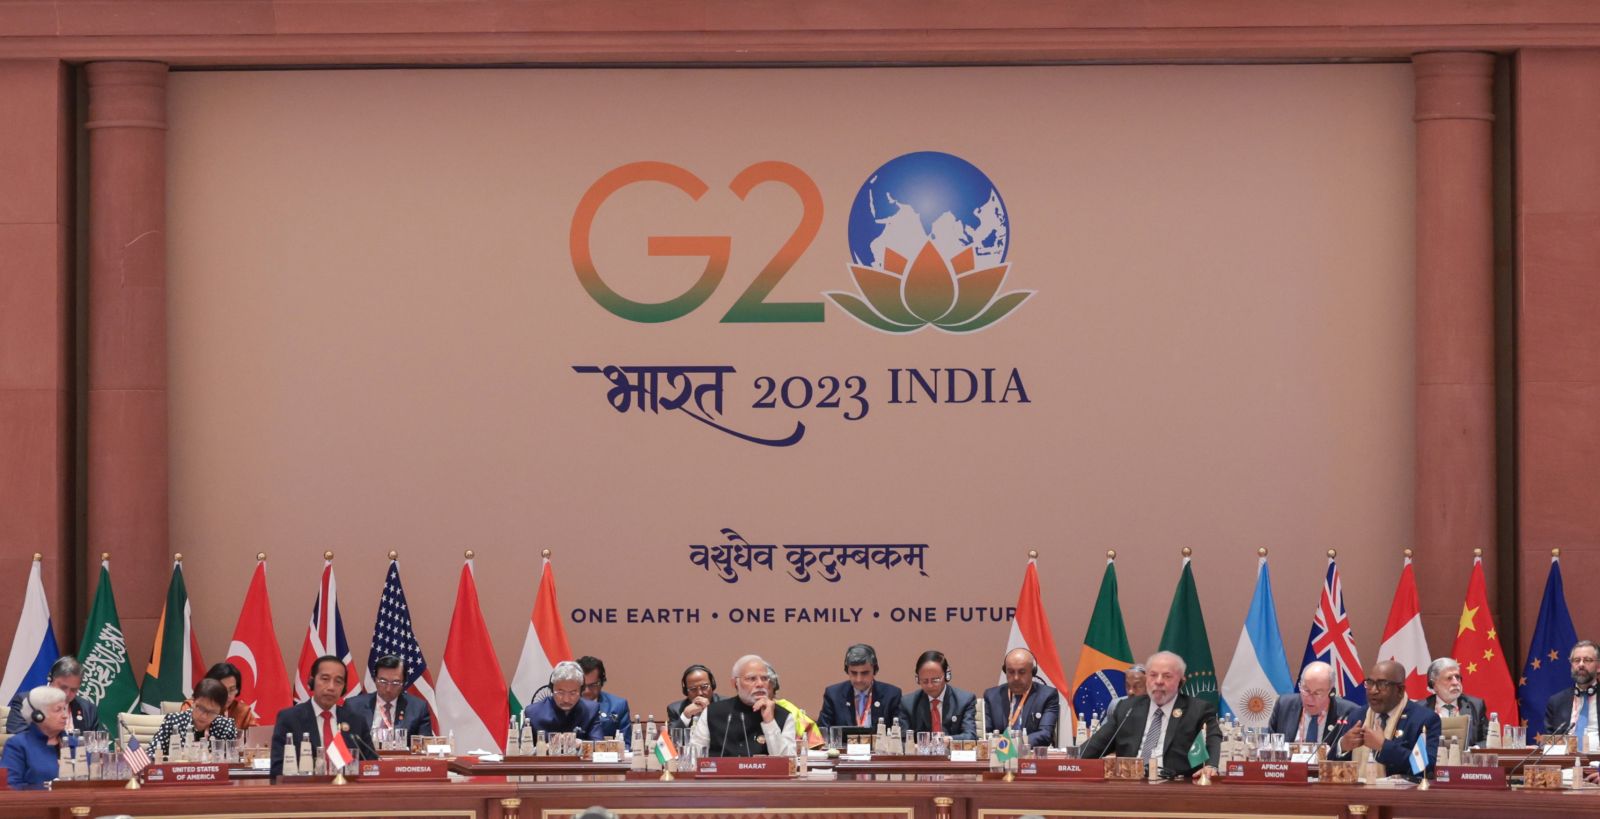 epa10852060 A handout photo made available by the Indian Press Information Bureau (PIB) shows a general view of world leaders attending the closing session of the G20 Summit at the ITPO Convention Centre Pragati Maidan in New Delhi, India, 10 September 2023. The G20 Heads of State and Government summit took place in the Indian capital on 09 and 10 September, where the participants earlier paid tribute at the Mahatama Gandhi memorial on the second and last day of the summit.  EPA/INDIA PRESS INFORMATION BUREAU  HANDOUT EDITORIAL USE ONLY/NO SALES